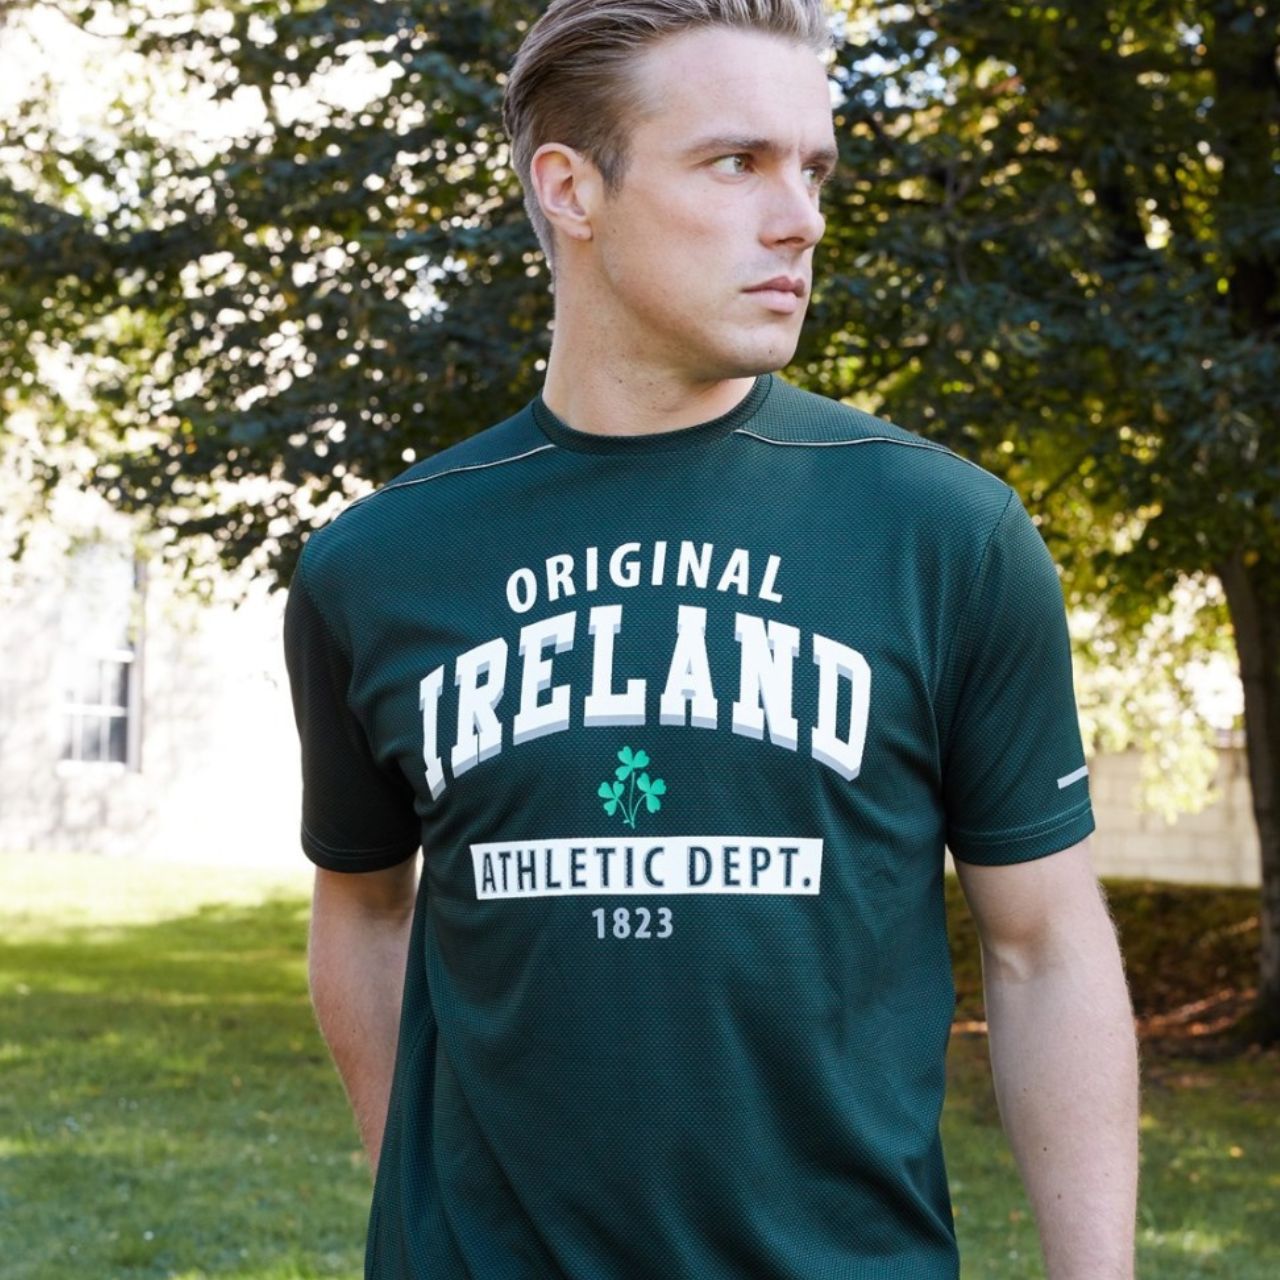 This bottle green performance T-shirt is part of the Lansdowne Sports Official Collection. Designed in a dry fit waffle performance fabric this shirt enhances breathability and comfort as well as improving hydration and circulation. It features an "Athletic Dept." and shamrock logo making it feel extra sporty.